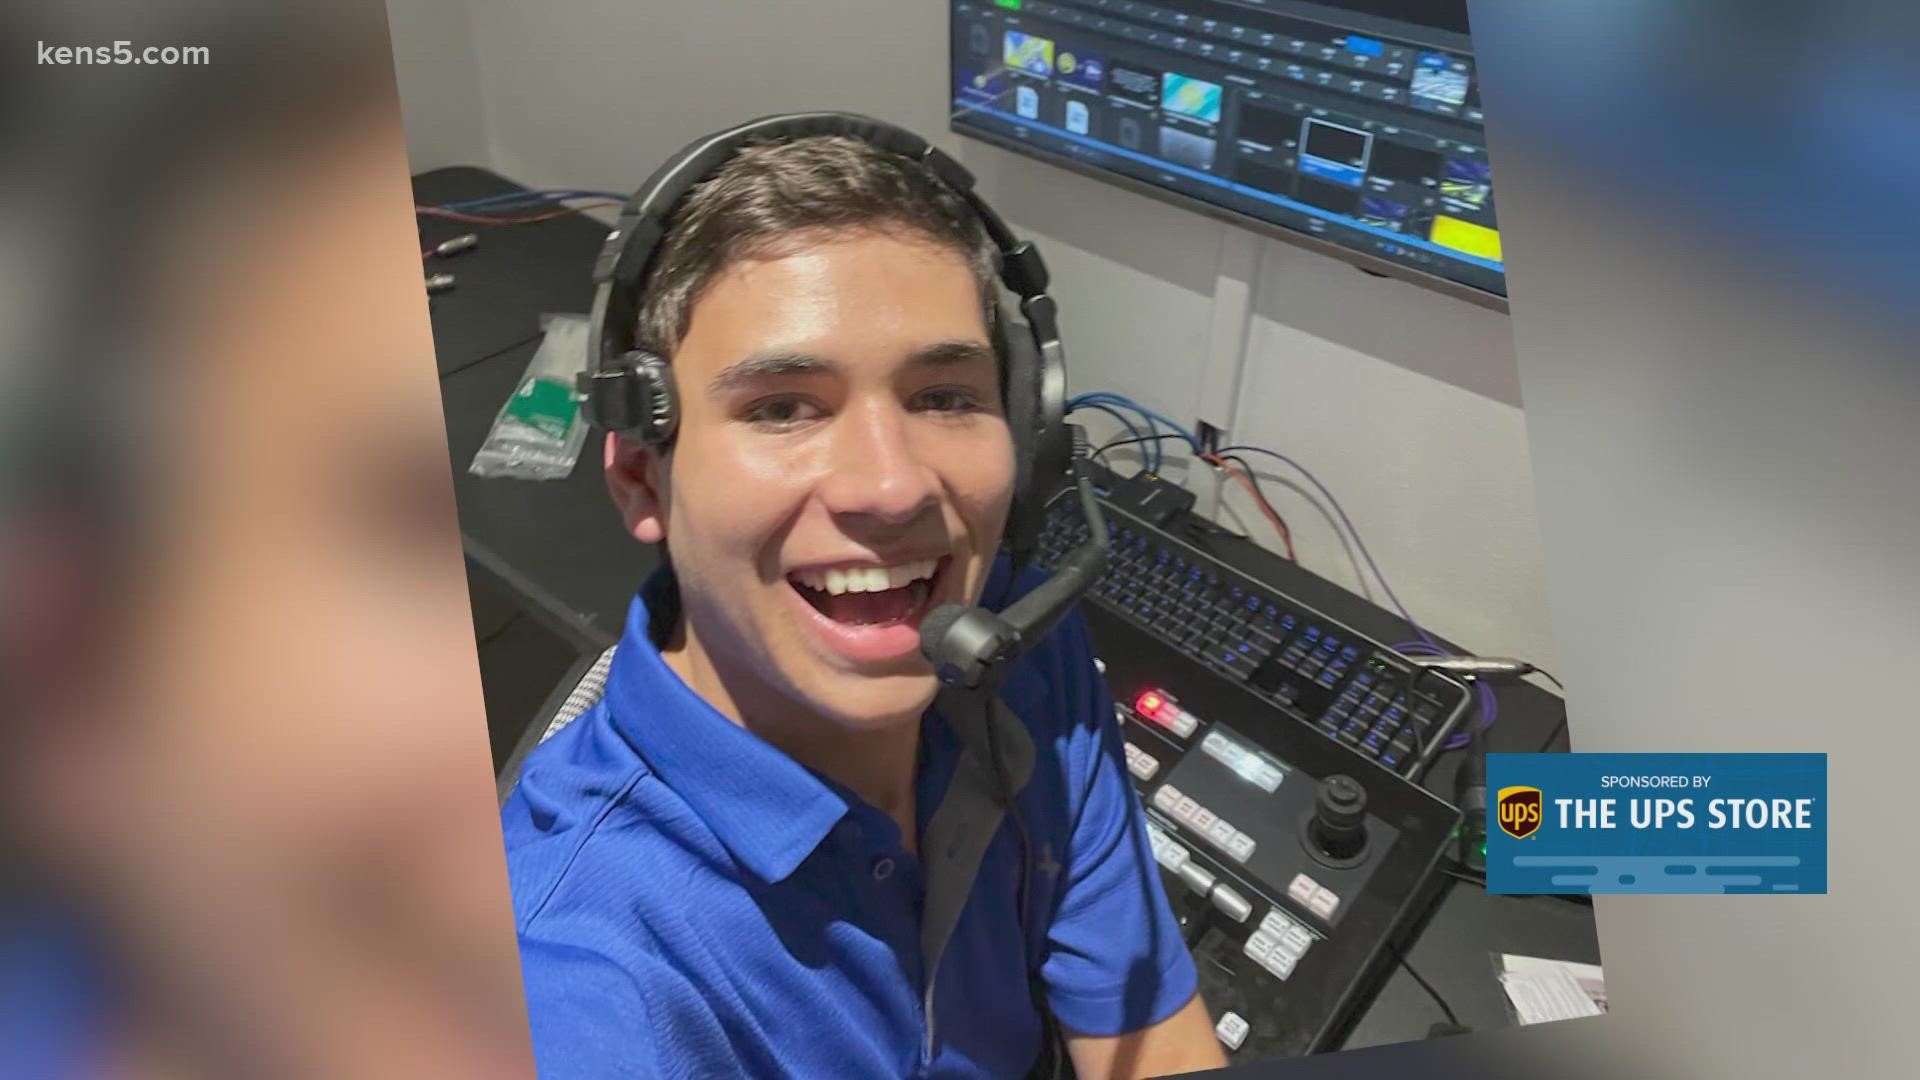 Junior Dylan Corso is a KENS5 All-Star Student.